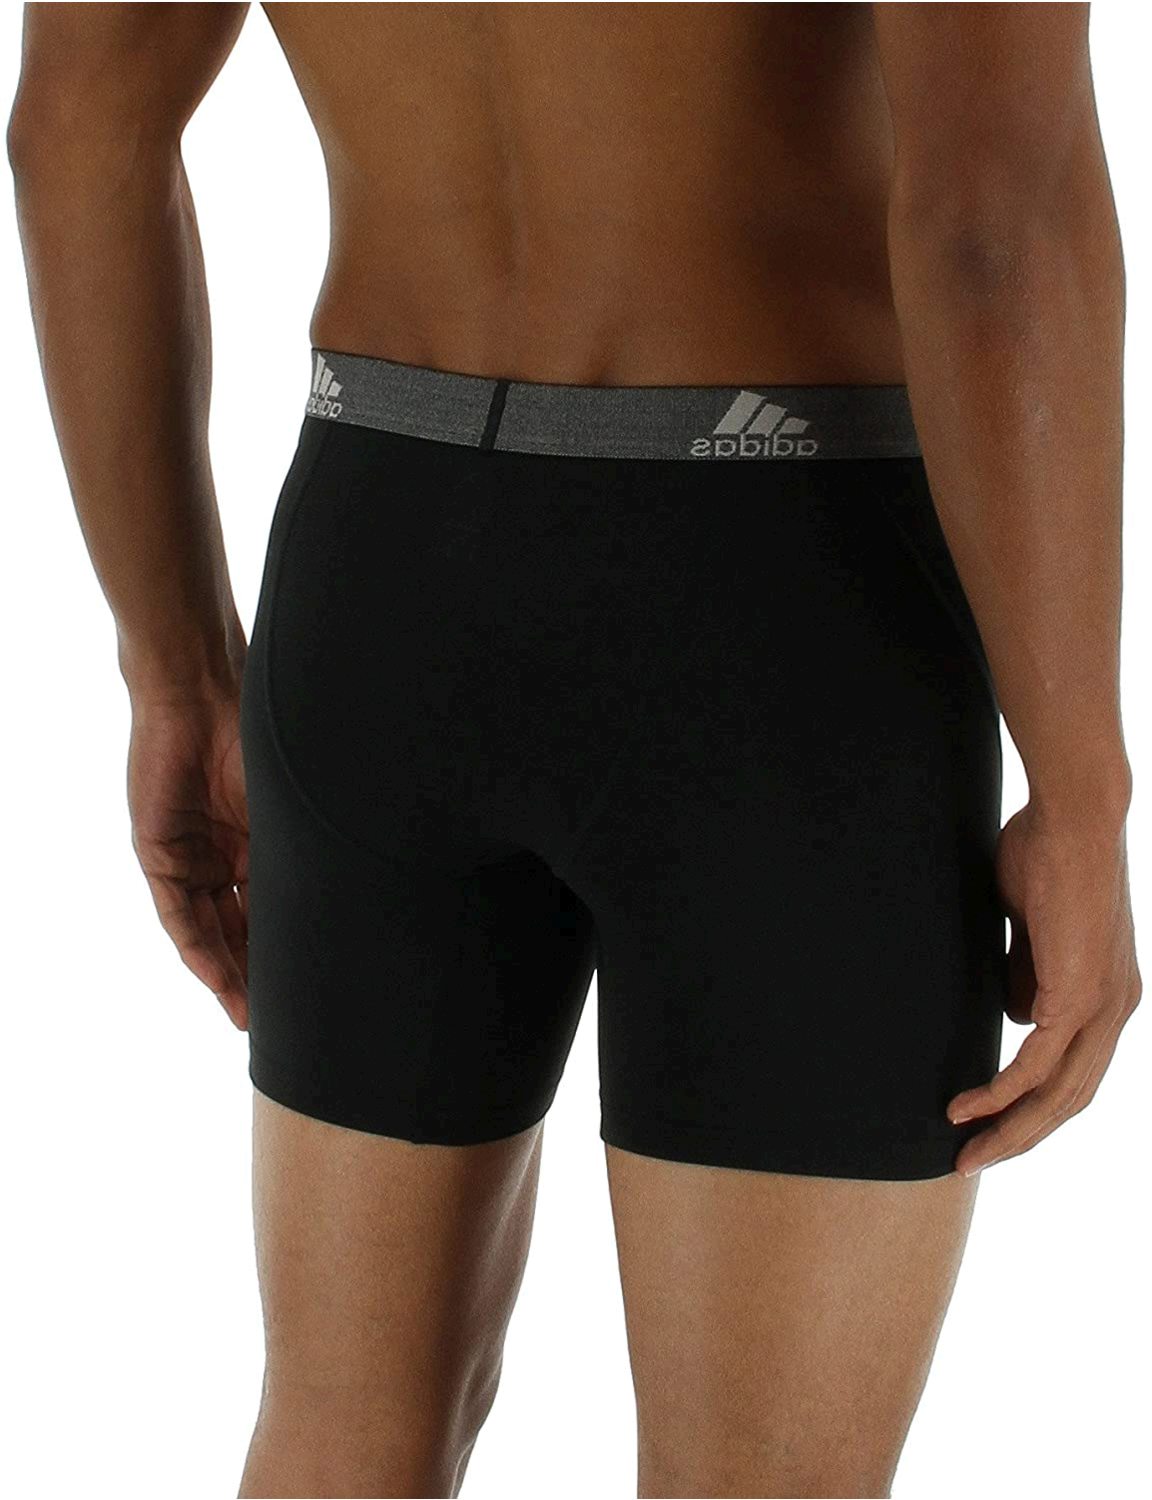 adidas Men's Relaxed Performance Climalite Boxer, Scarlet Black, Size ...